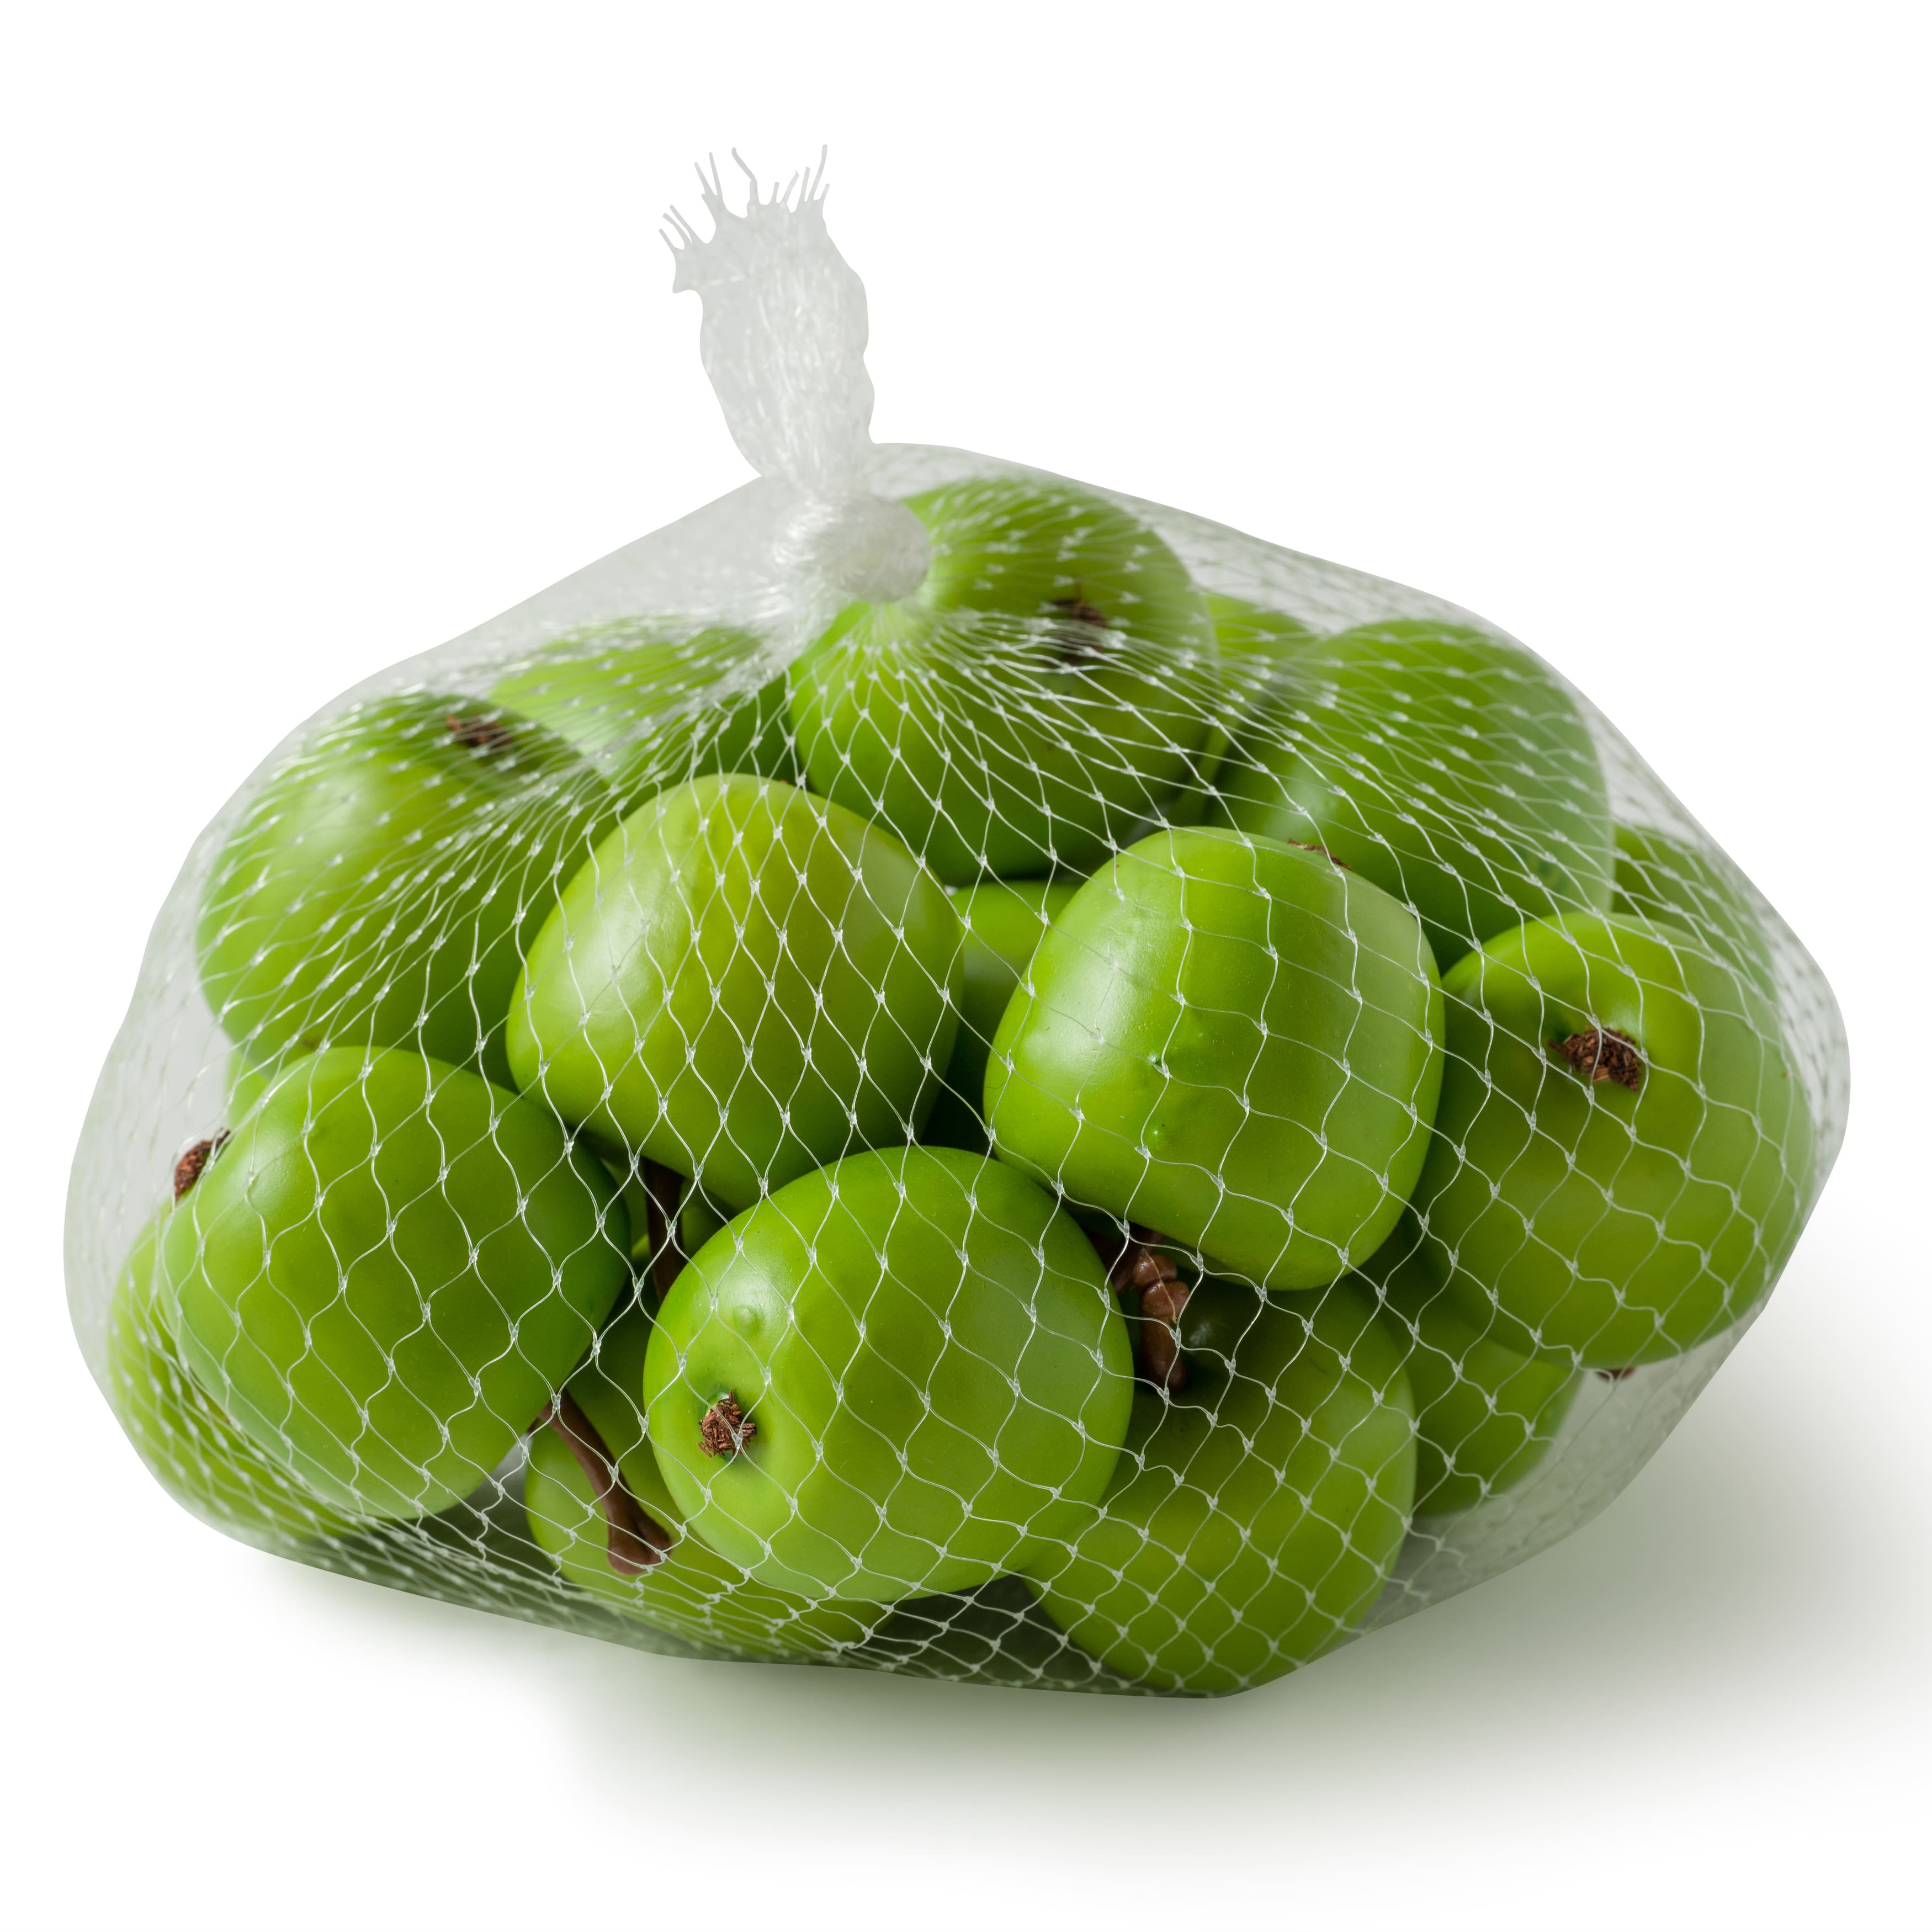 Buy the Mini Green Apples by Ashland® at Michaels